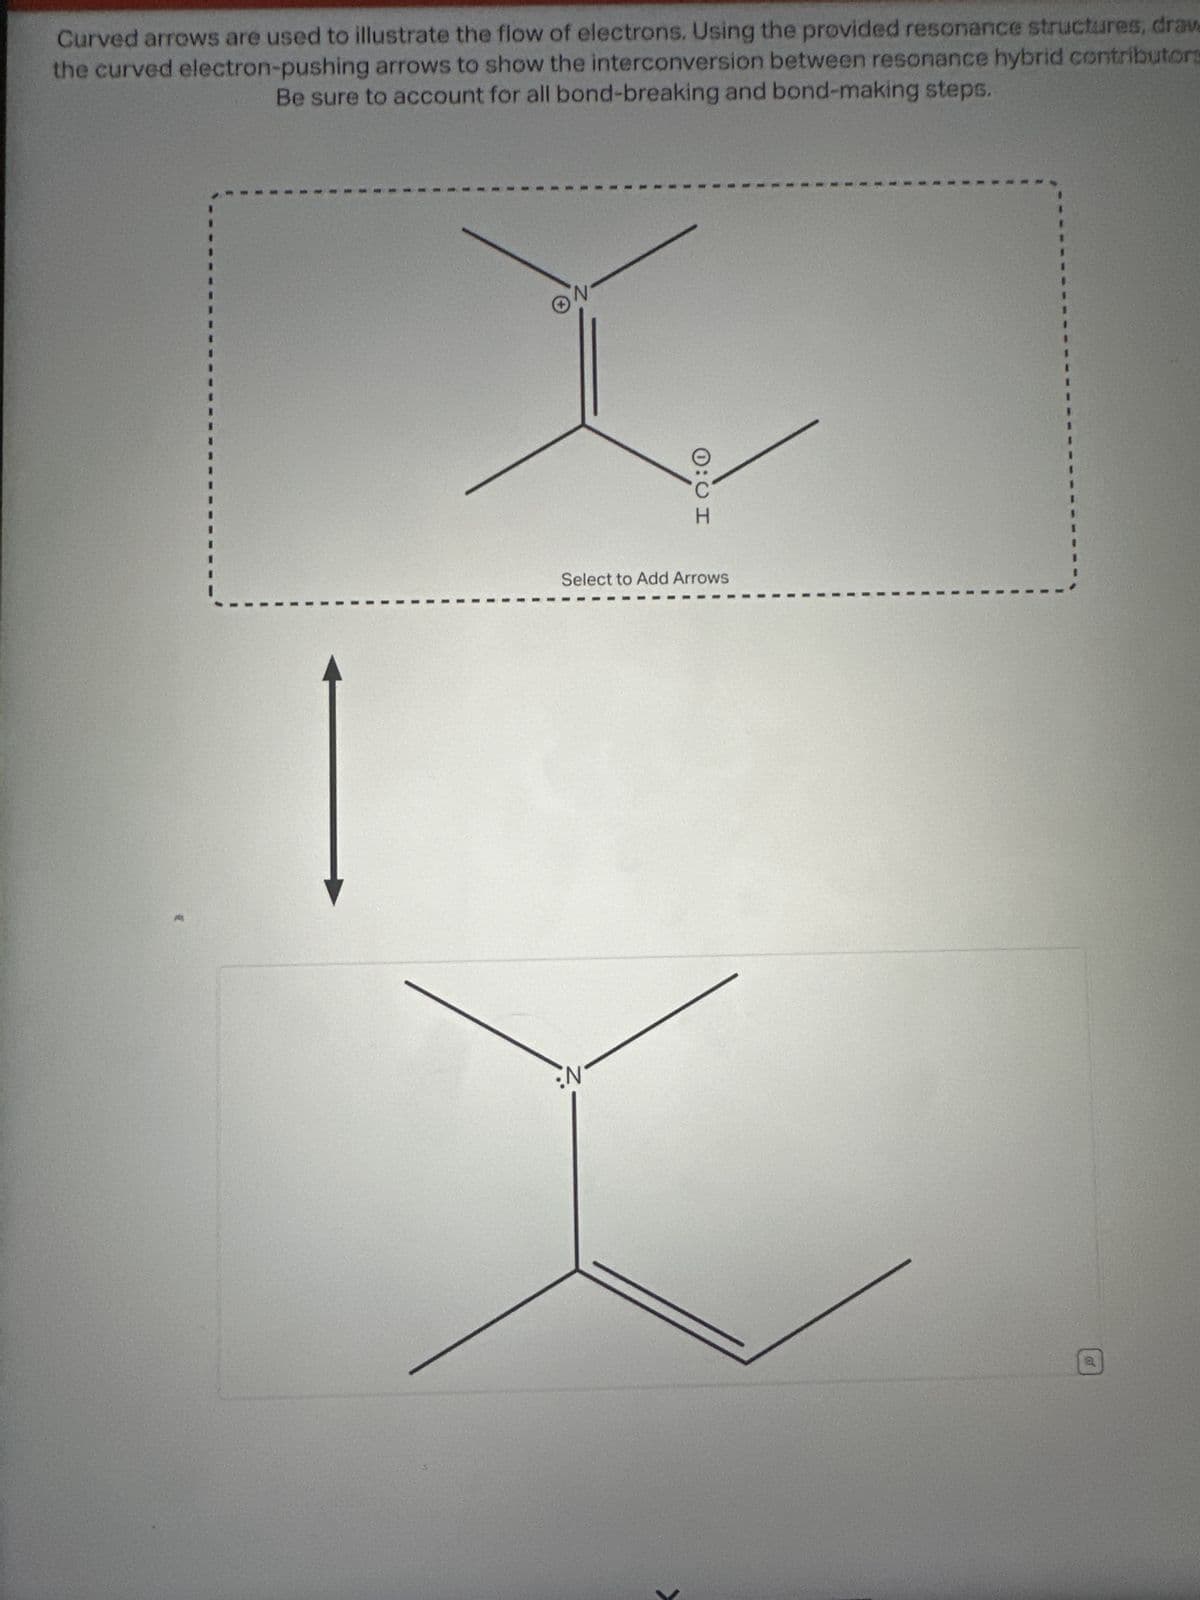 Curved arrows are used to illustrate the flow of electrons. Using the provided resonance structures, draw
the curved electron-pushing arrows to show the interconversion between resonance hybrid contributors
Be sure to account for all bond-breaking and bond-making steps.
ON
0:0 I
Select to Add Arrows
:N